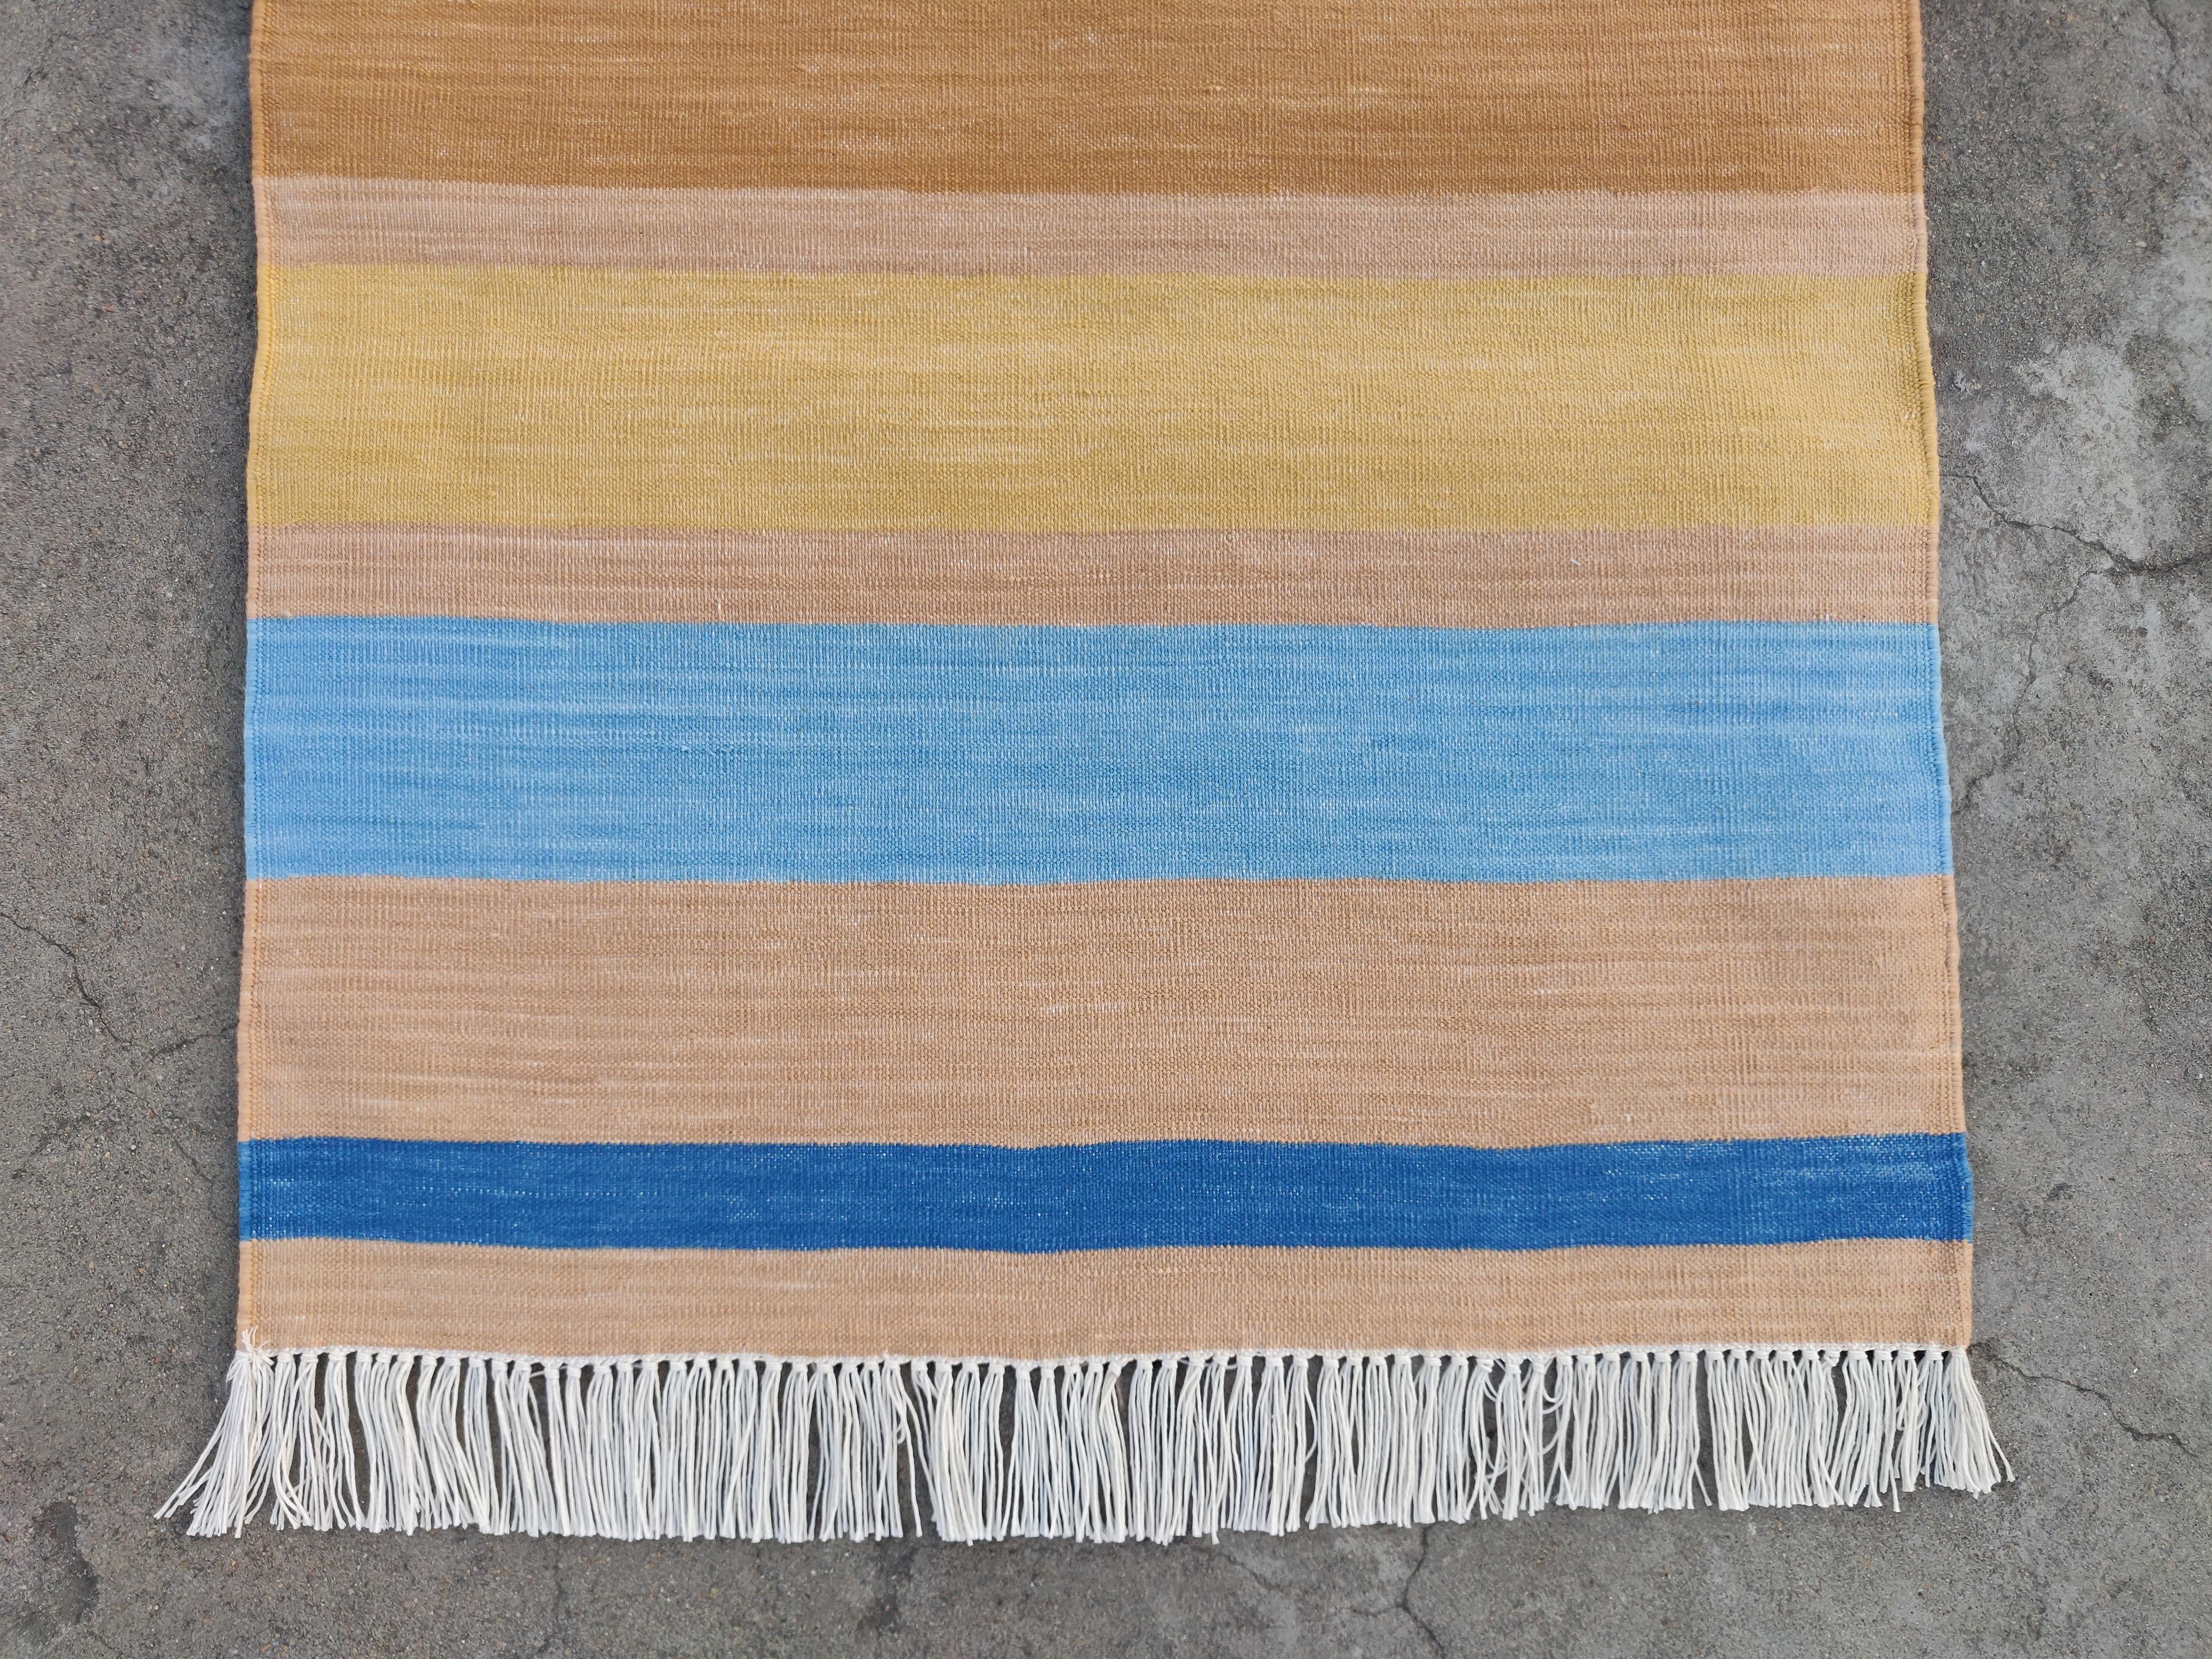 Handmade Cotton Area Flat Weave Rug, 5x7 Tan And Blue Striped Indian Dhurrie Rug For Sale 2